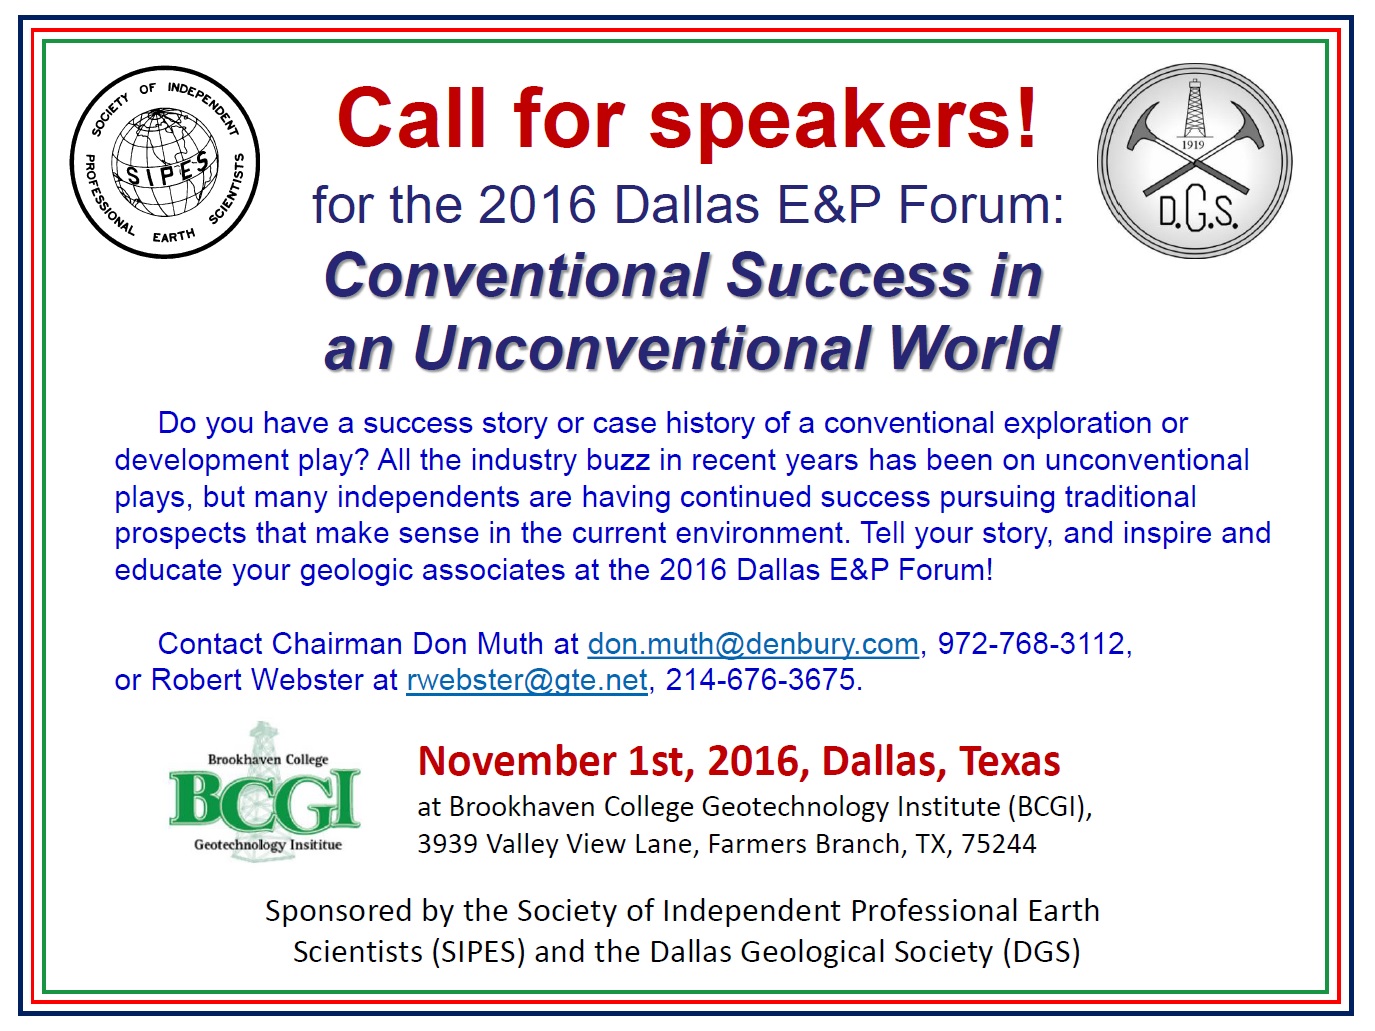 Call For Speakers 16 Dallas E P Forum East Texas Geological Society